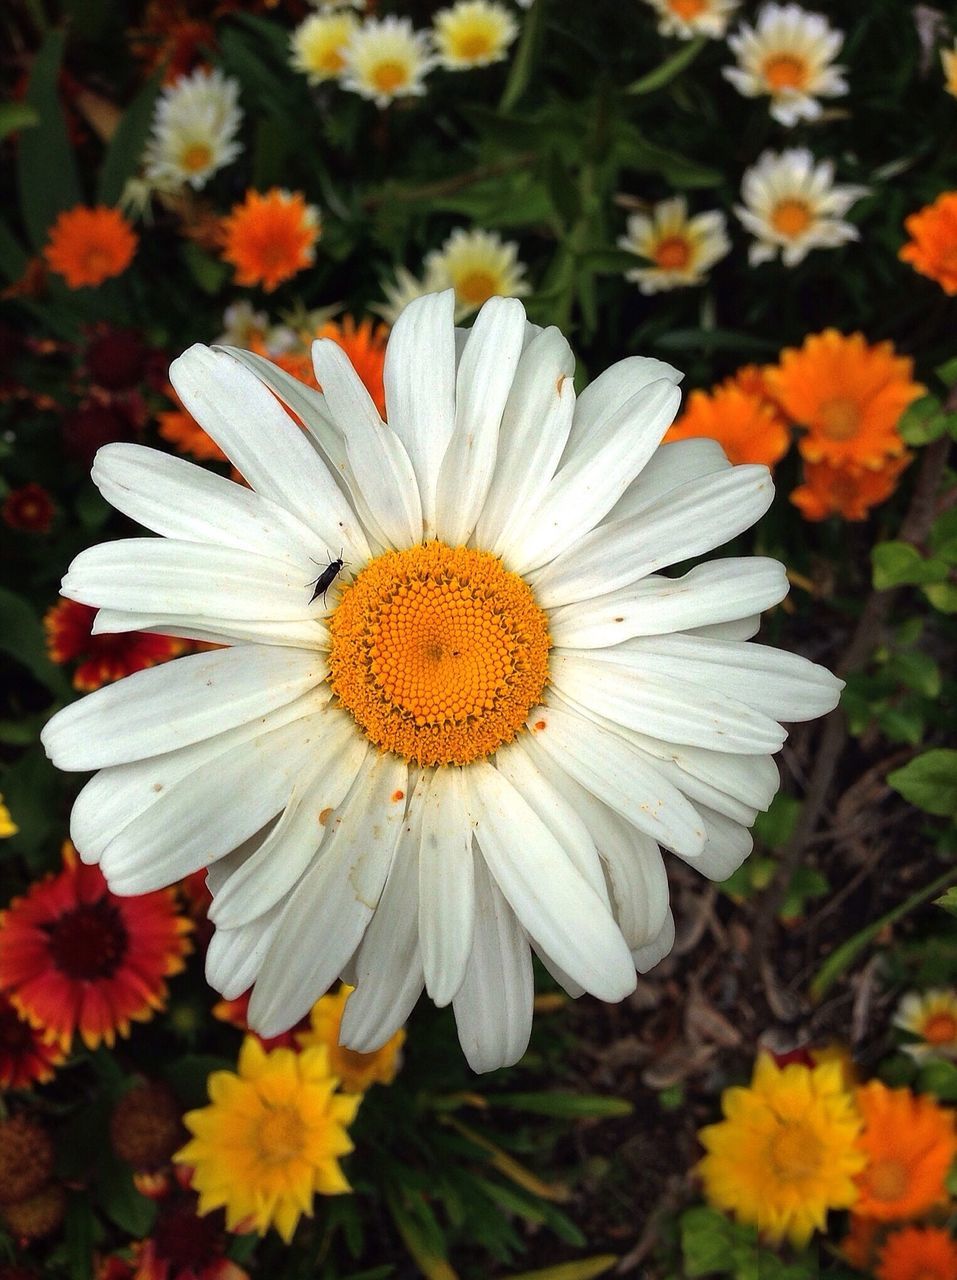 flower, petal, freshness, flower head, fragility, pollen, growth, beauty in nature, blooming, close-up, daisy, yellow, nature, focus on foreground, in bloom, plant, white color, field, high angle view, single flower